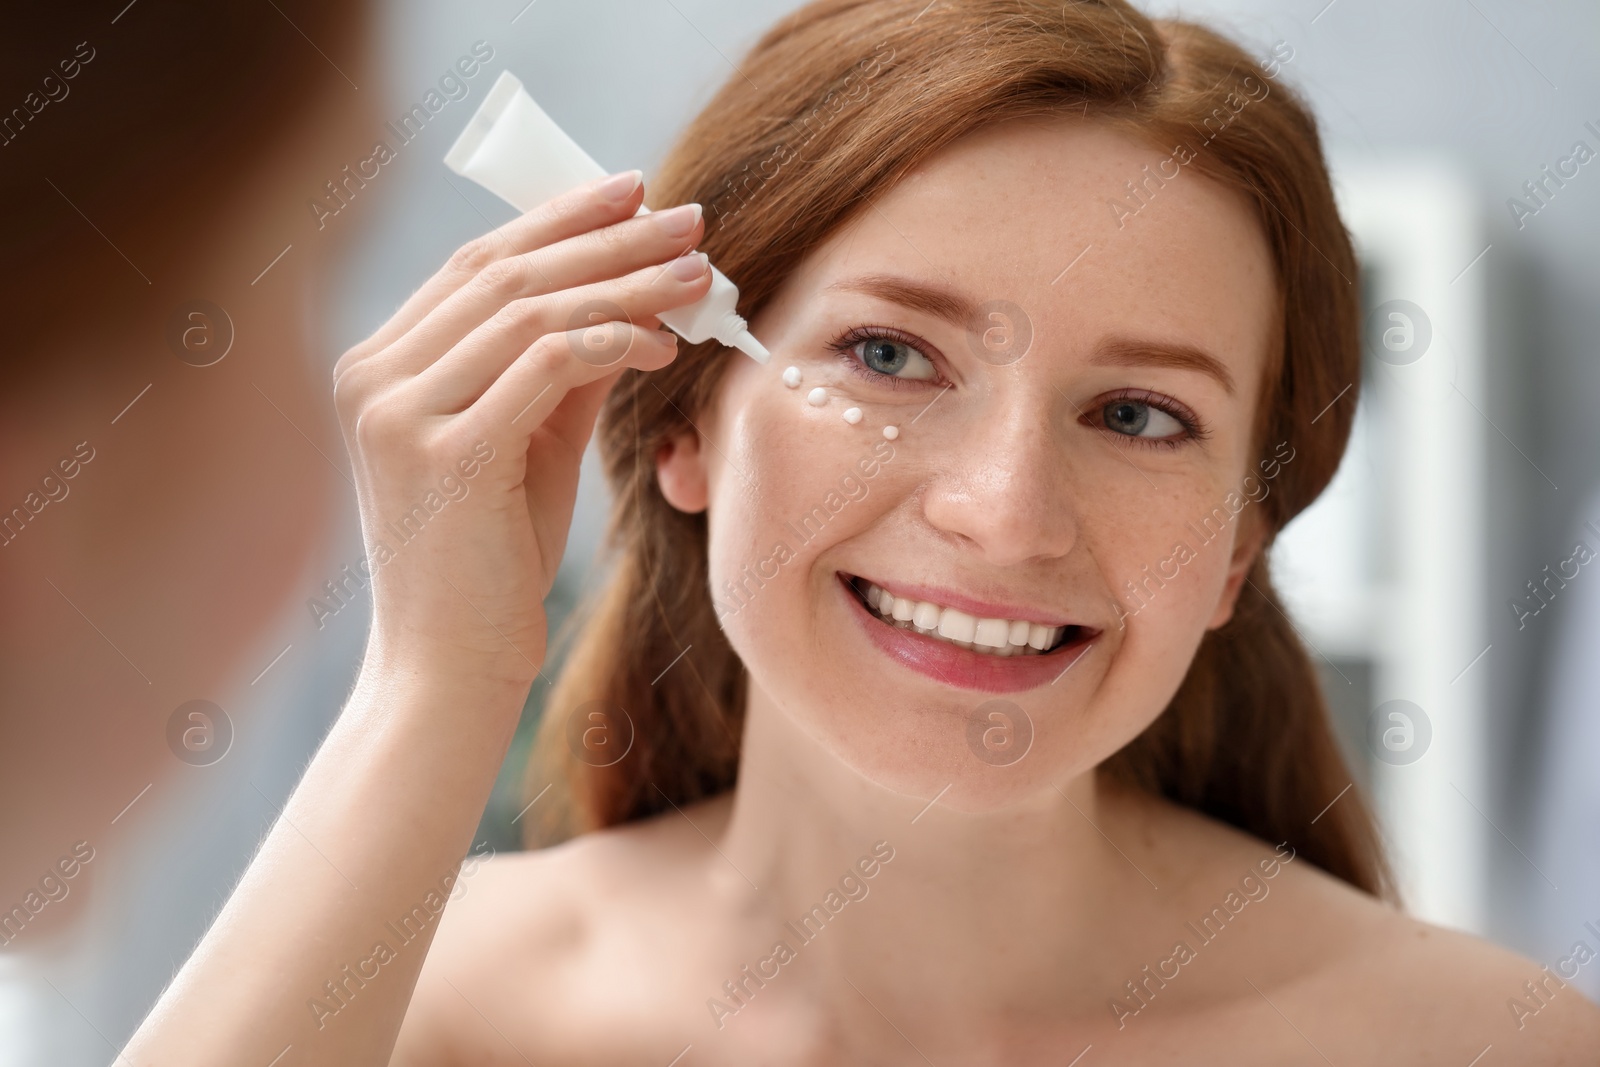 Photo of Smiling woman with freckles applying cream onto her face near mirror in bathroom